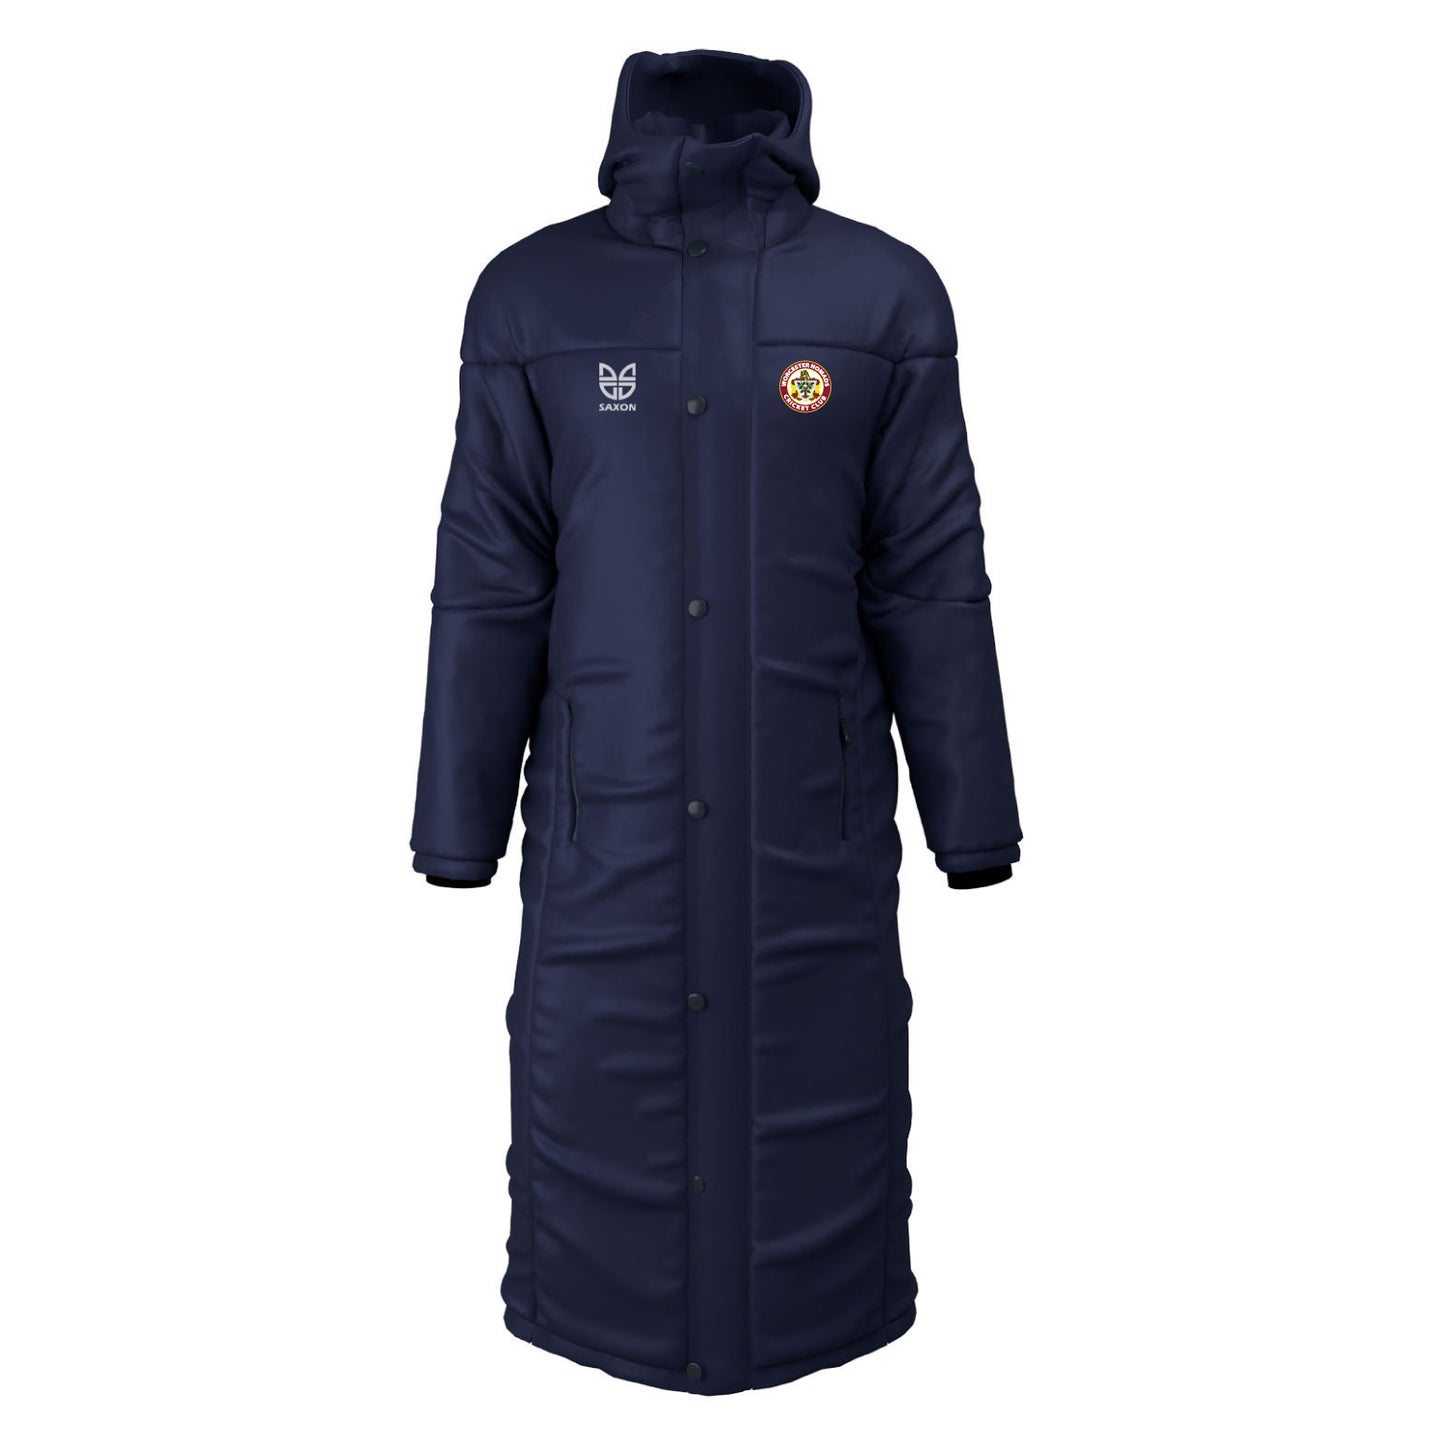 Worcester Nomads Cricket Club Contoured Thermal Sub Coat